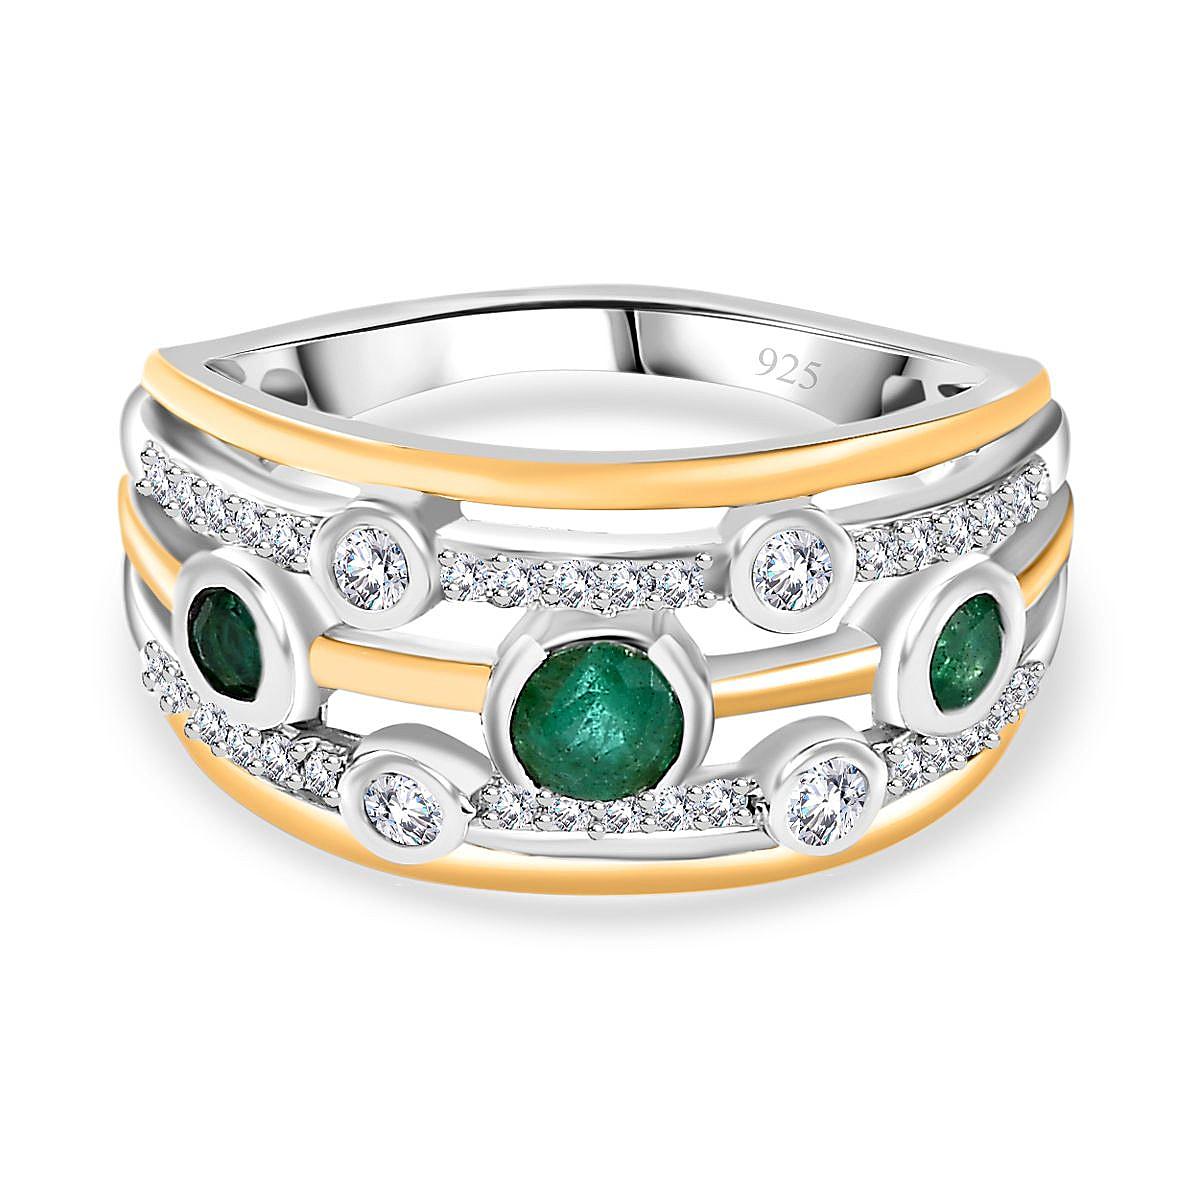 Premium Emerald & Moissanite Bubble Multi Row Ring in 18K Vermeil YG & Platinum Plated Sterling Silver, Silver Wt. 5.45 Gms